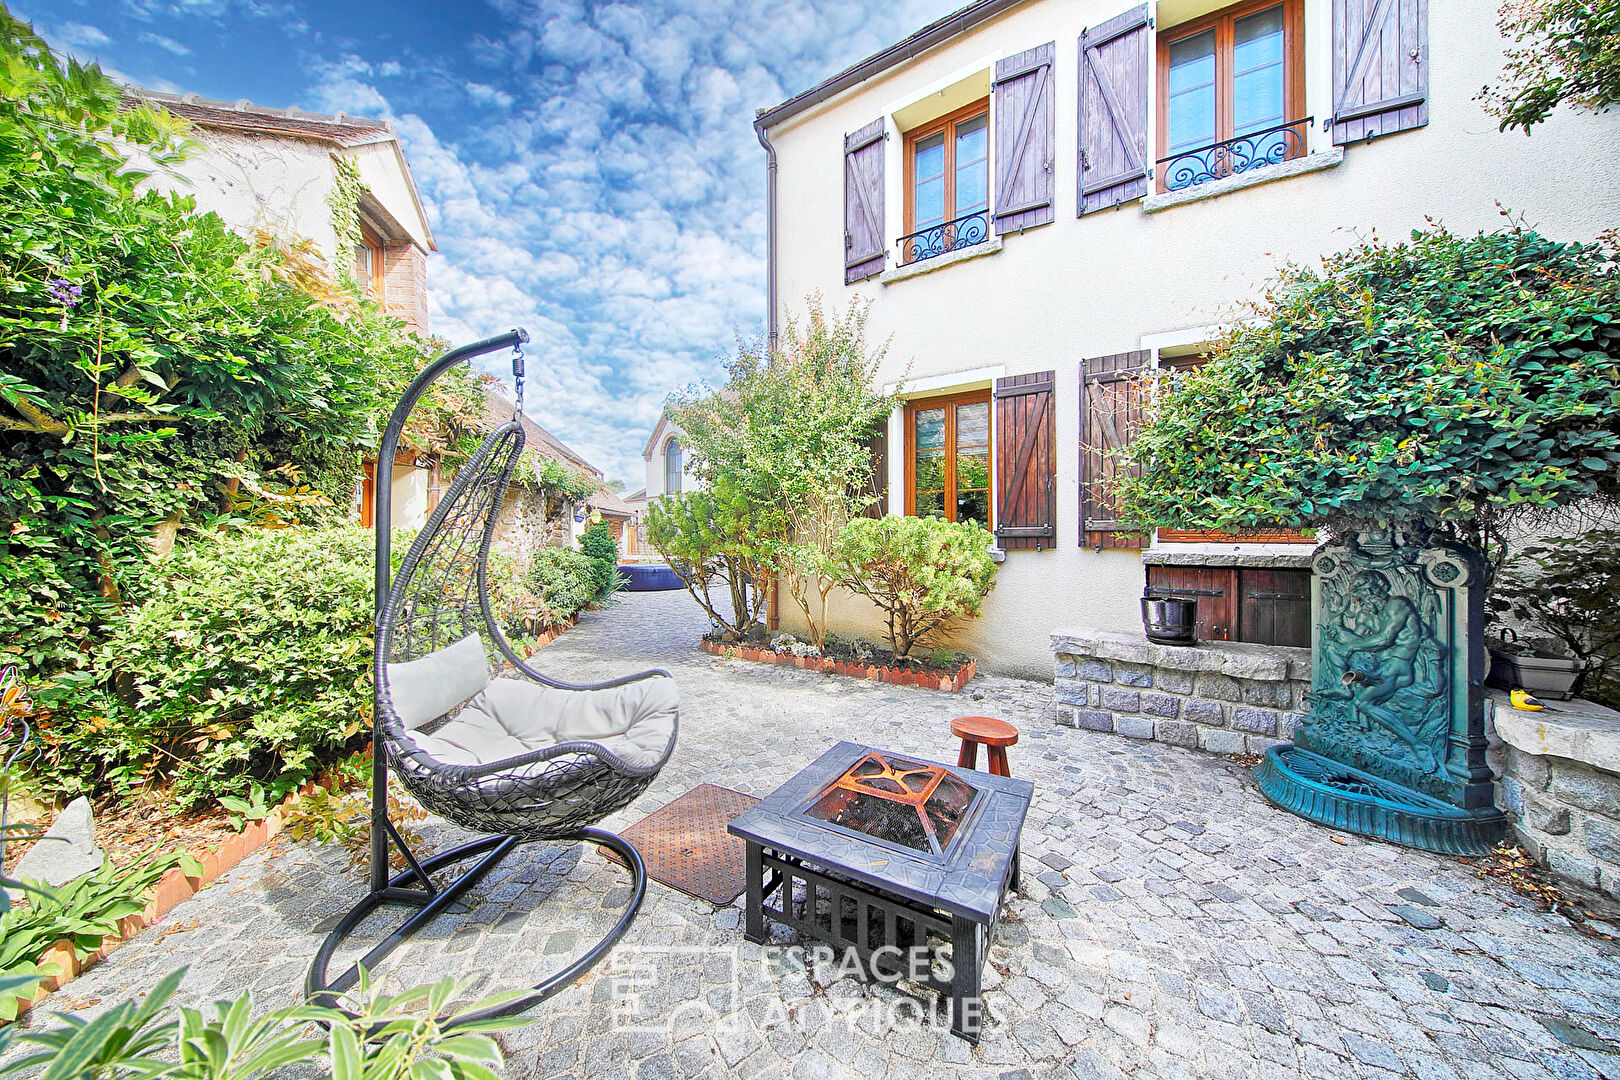 Charming townhouse with inner courtyard and outbuilding